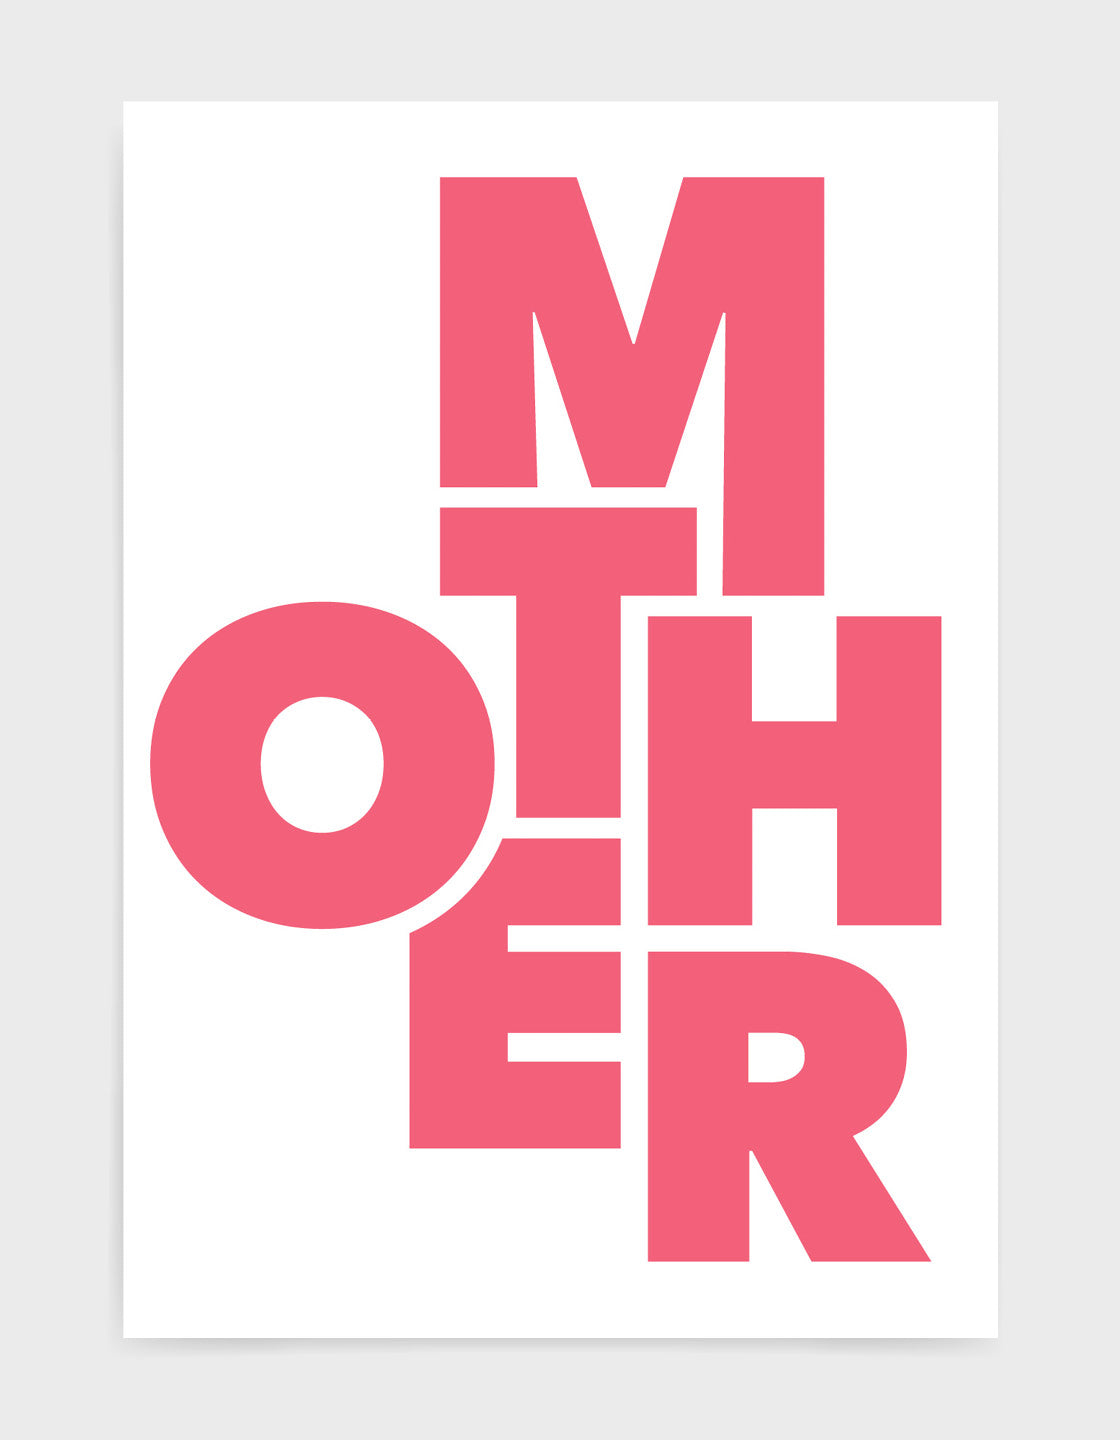 typography art print of the word mother in pink text against a white background